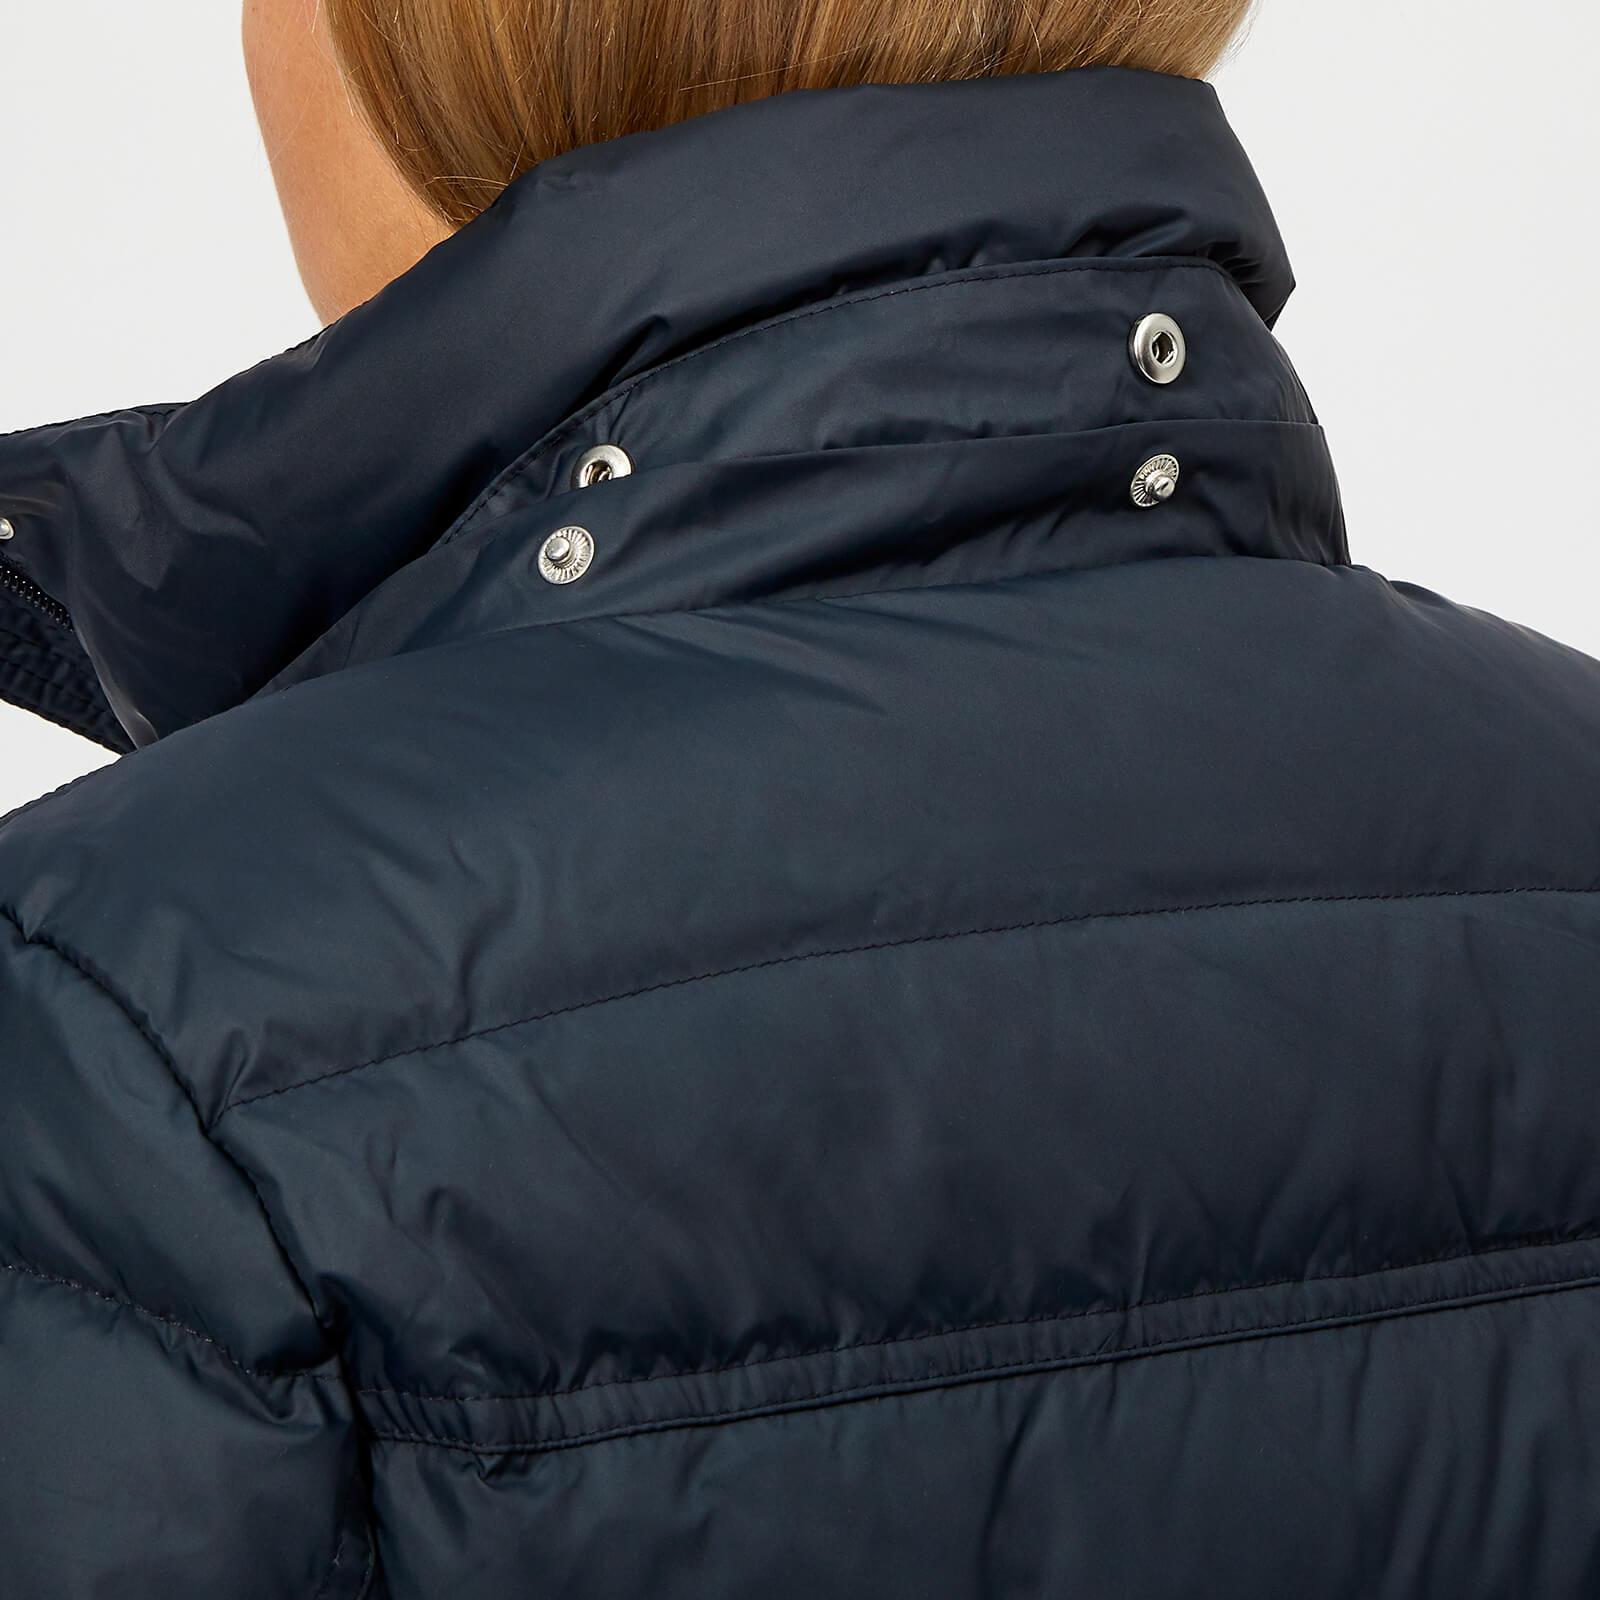 Tommy Hilfiger New Tyra Down Coat in Blue - Lyst